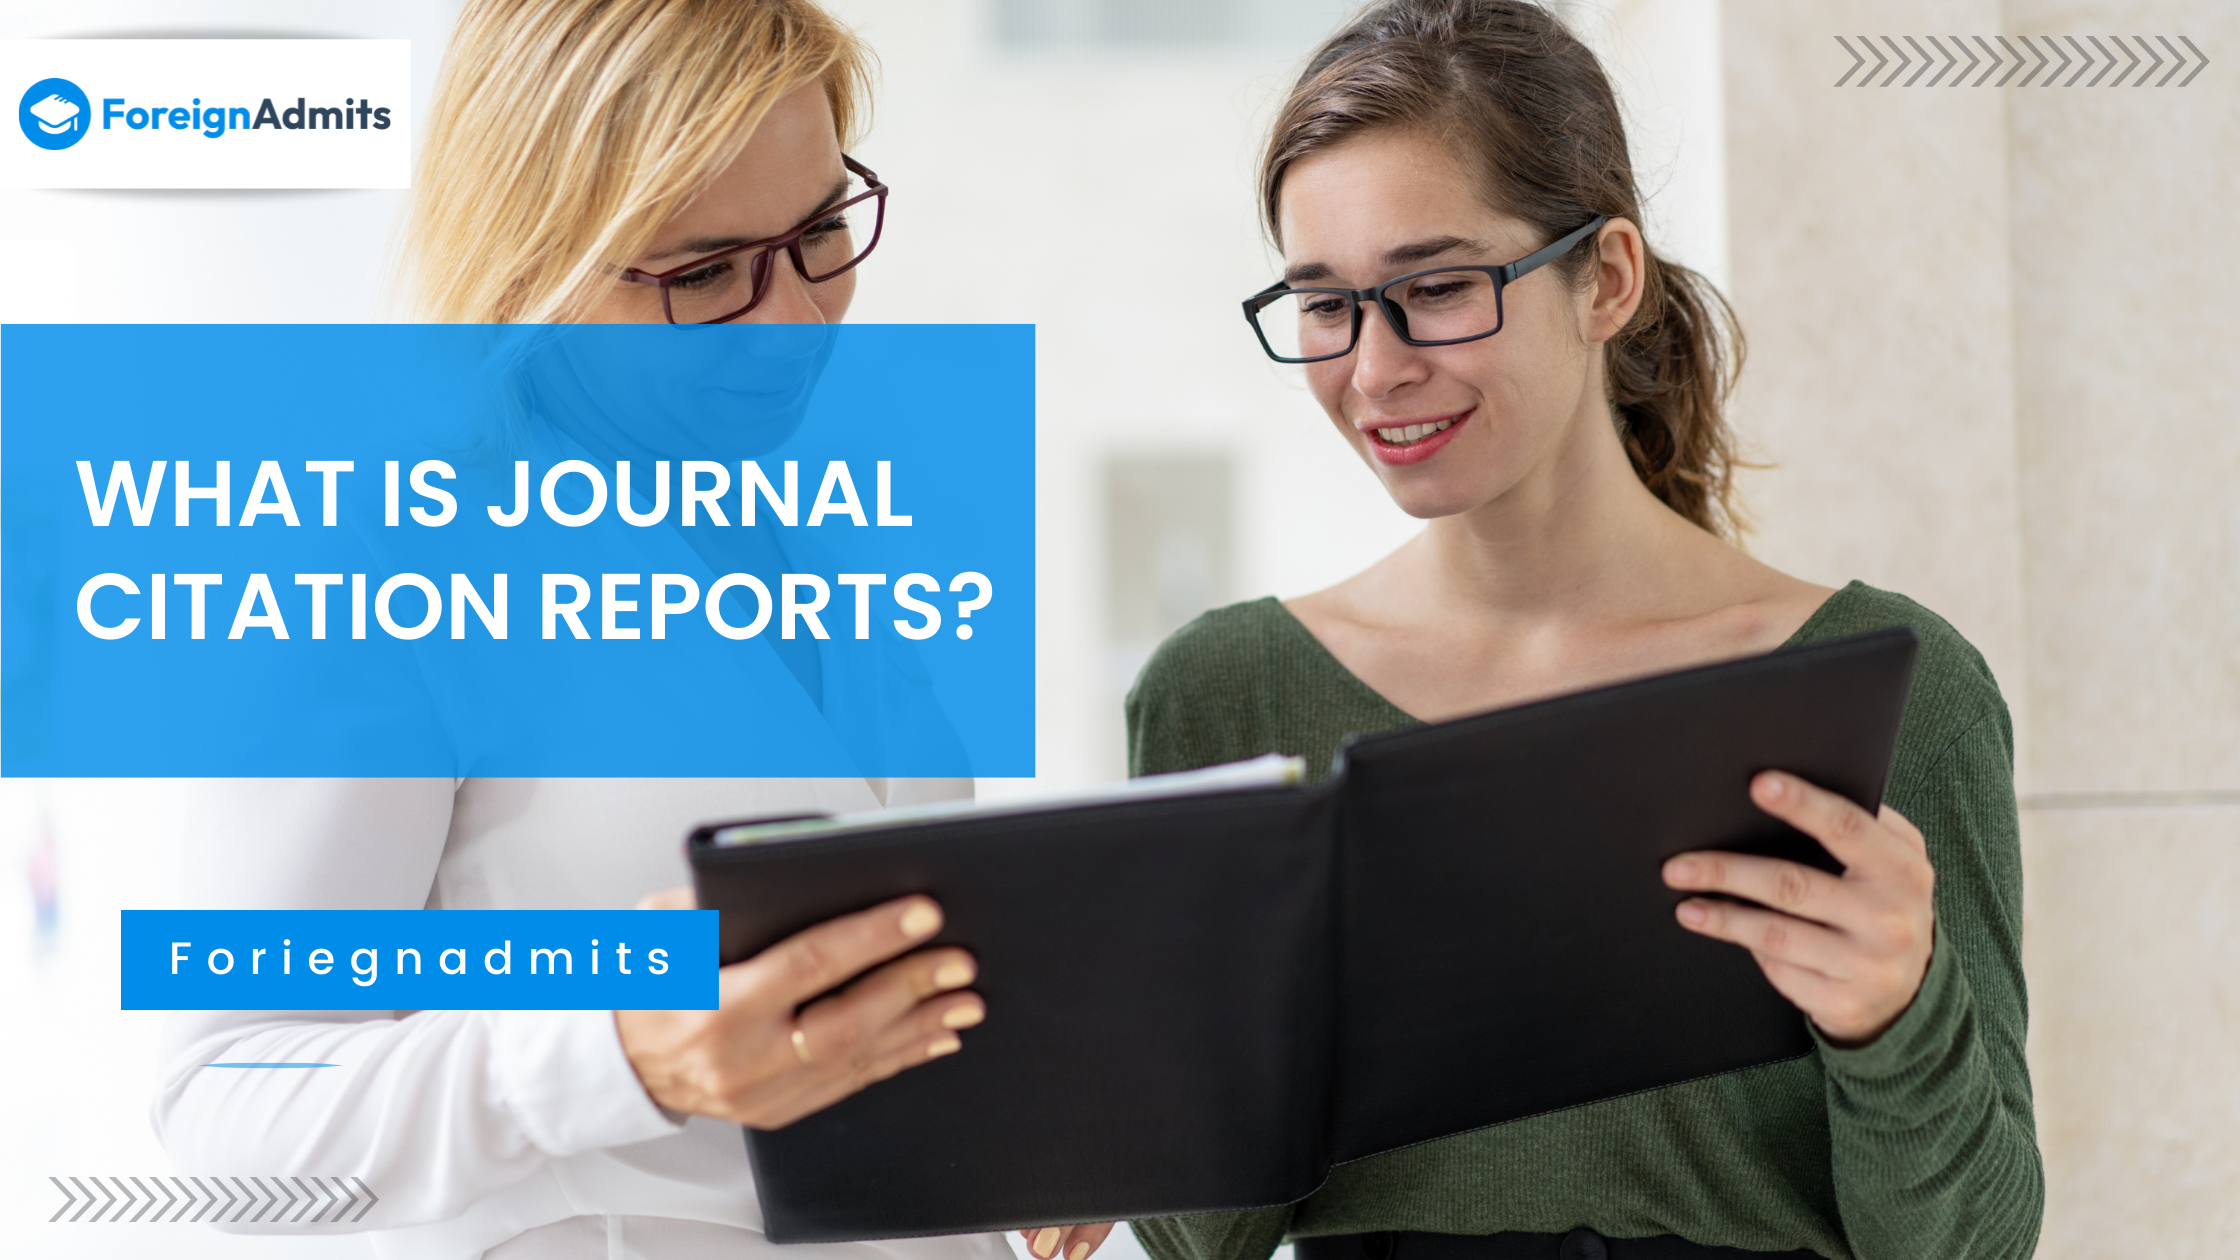 What Is Journal Citation Reports?